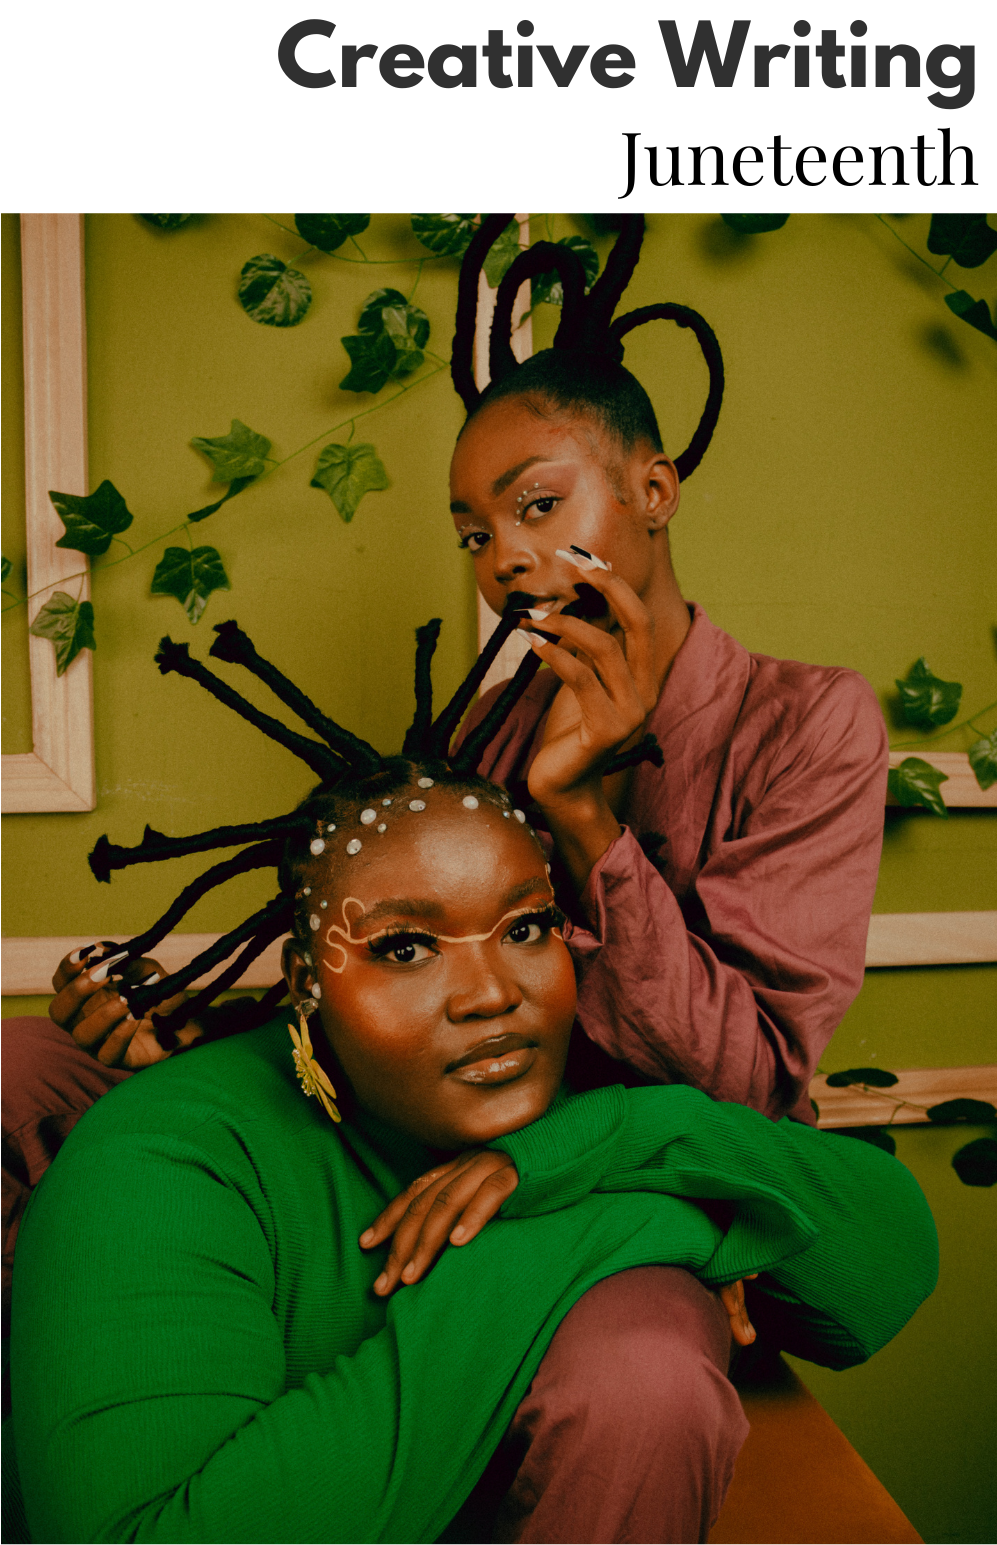 Image of two Black women, with one holding the other's artistically braided hair. 